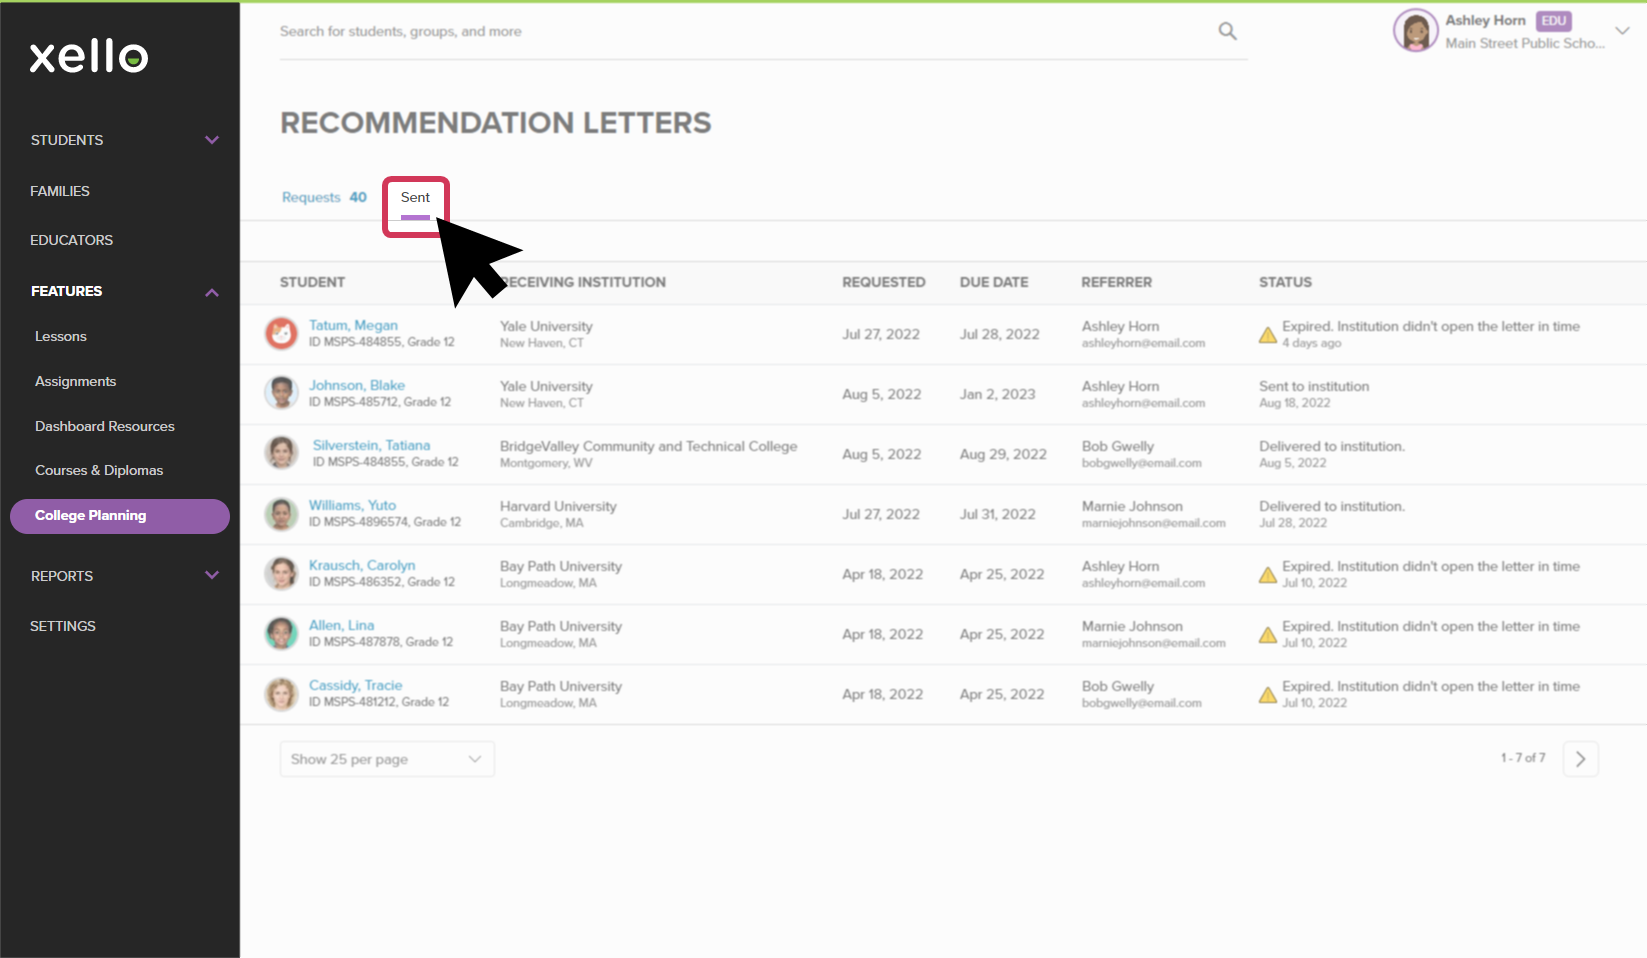 Recommendation Letters page in Xello with the cursor over the "Sent" tab